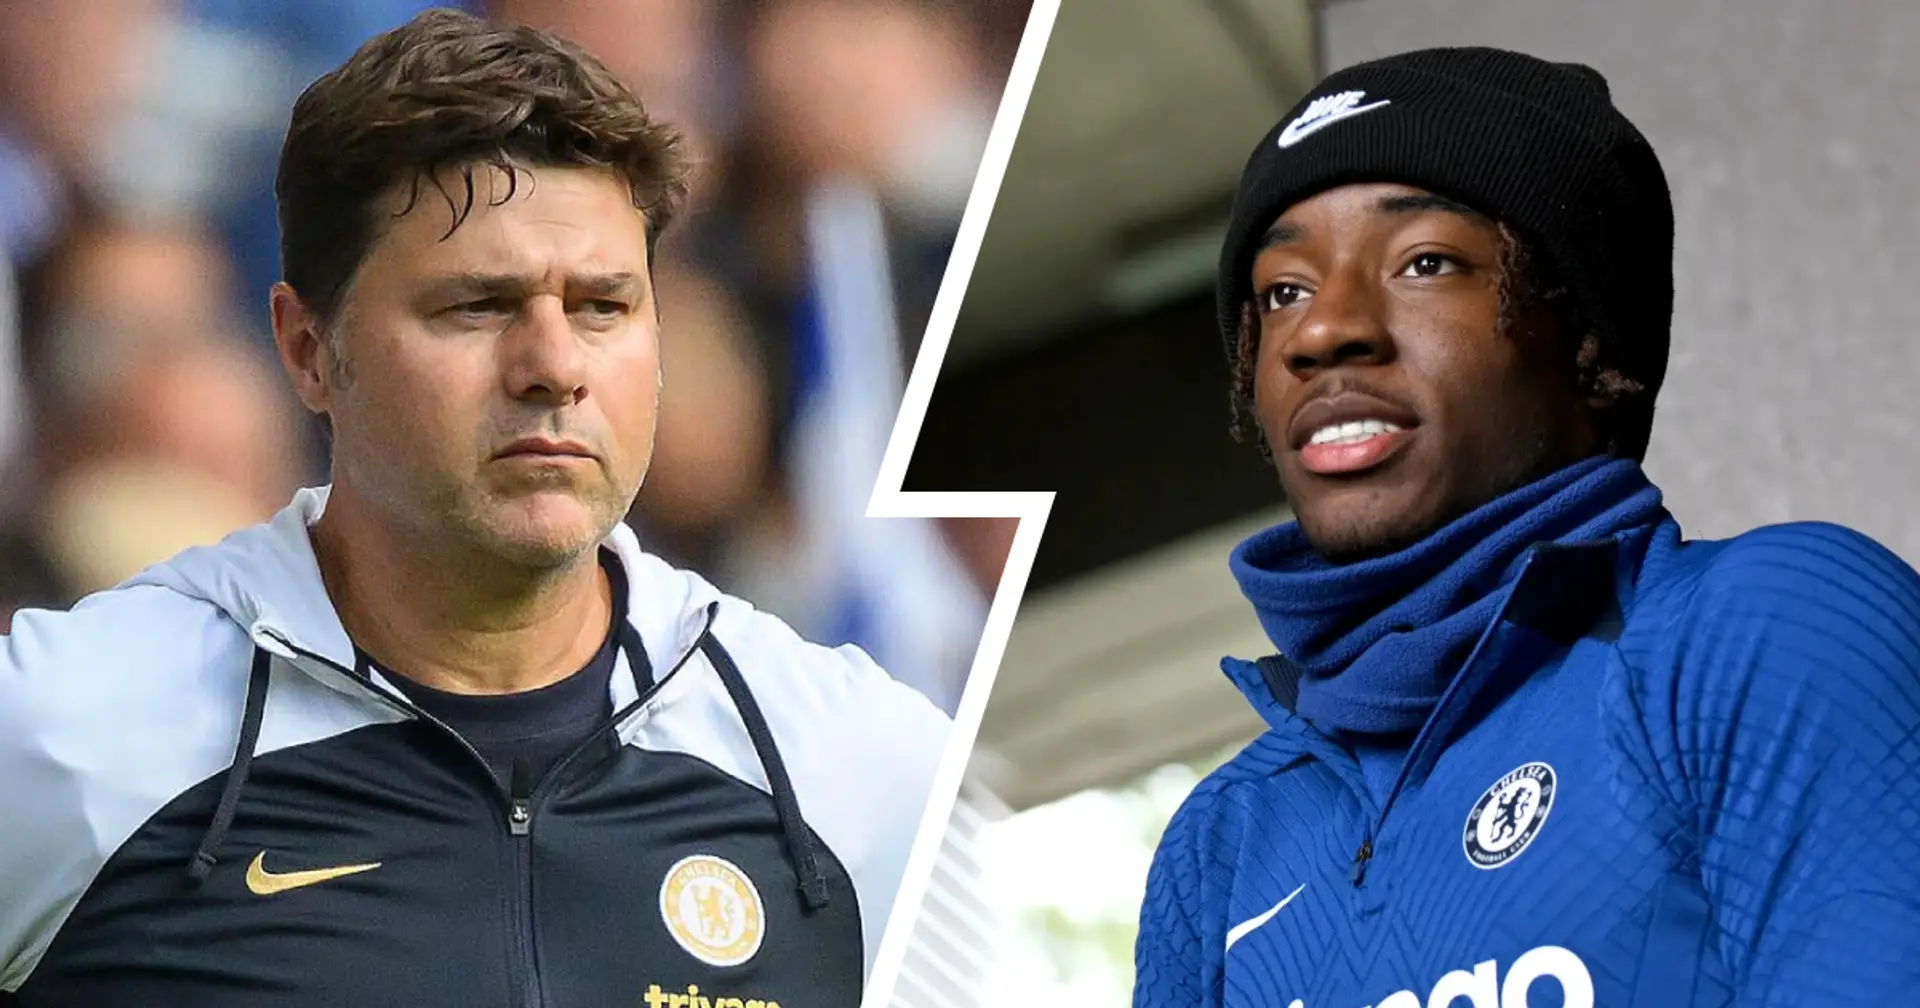 'He’s tough with me': Madueke on working with Pochettino